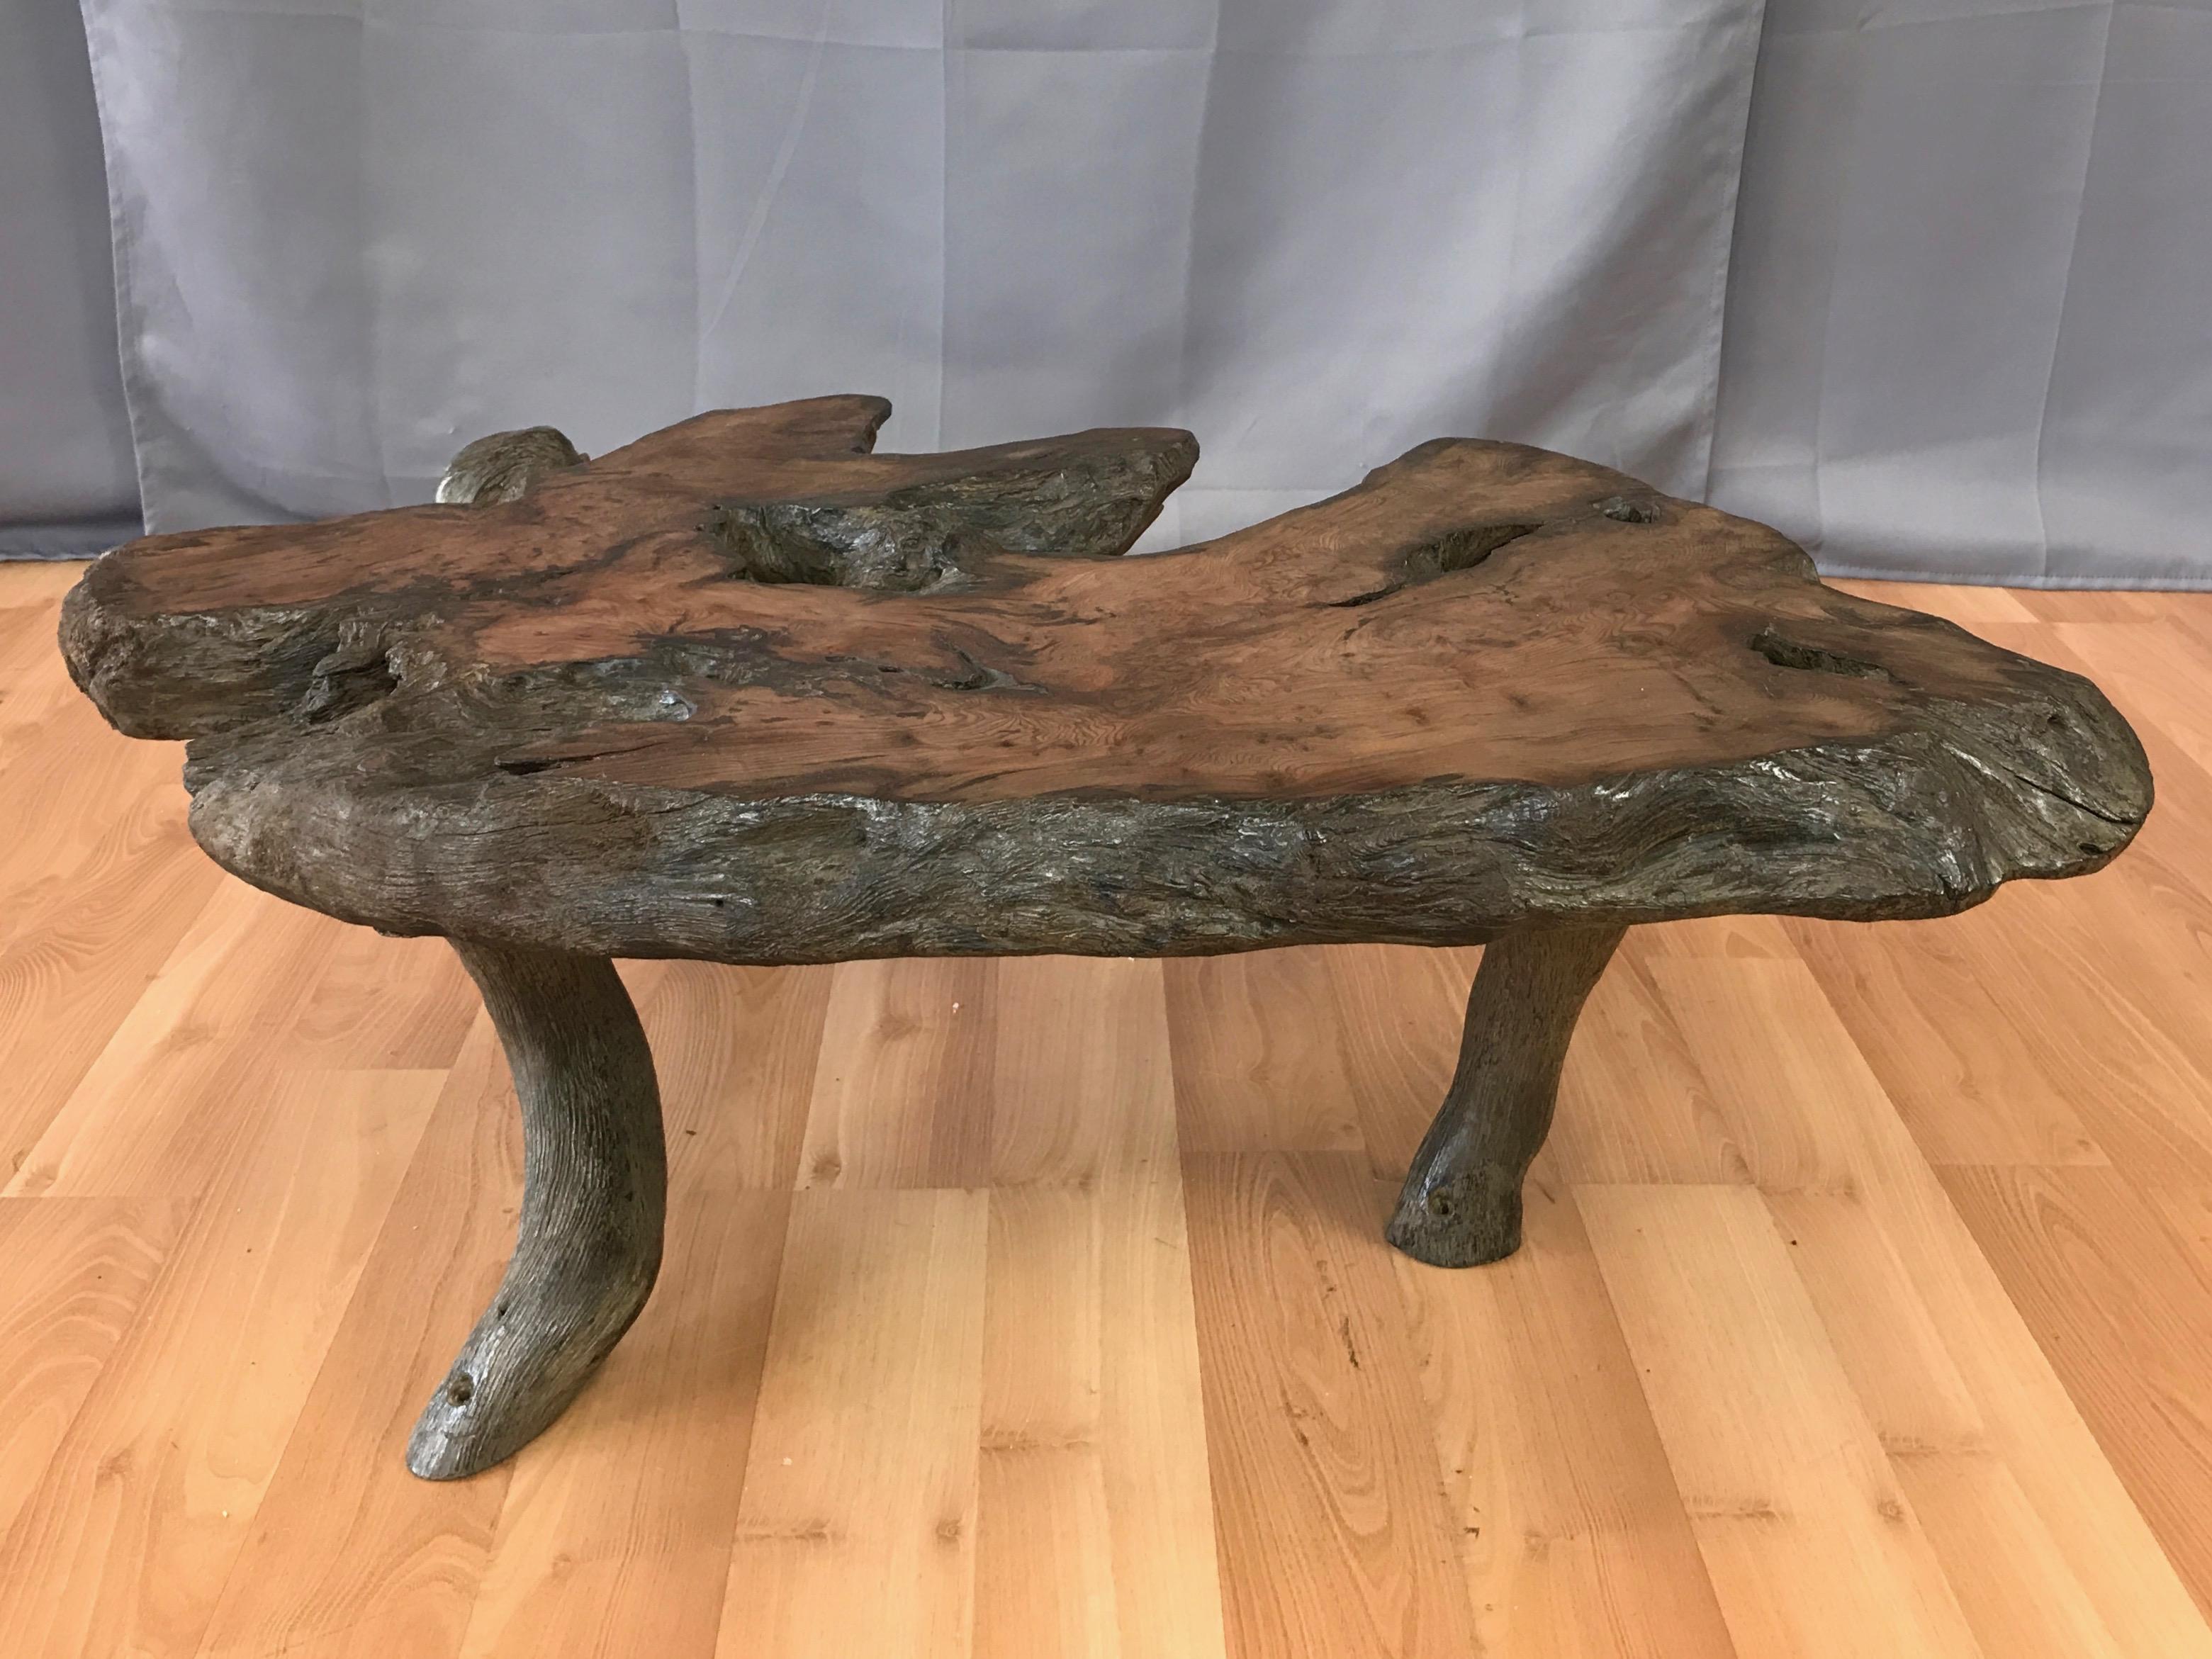 A live edge black walnut burl small coffee table or side table with tree limb legs, circa 1960s.

Irregularly shaped 2.25 inch-thick slab top displays great natural character, with chaotic grain patterns, marks, and a number of fissures and holes.